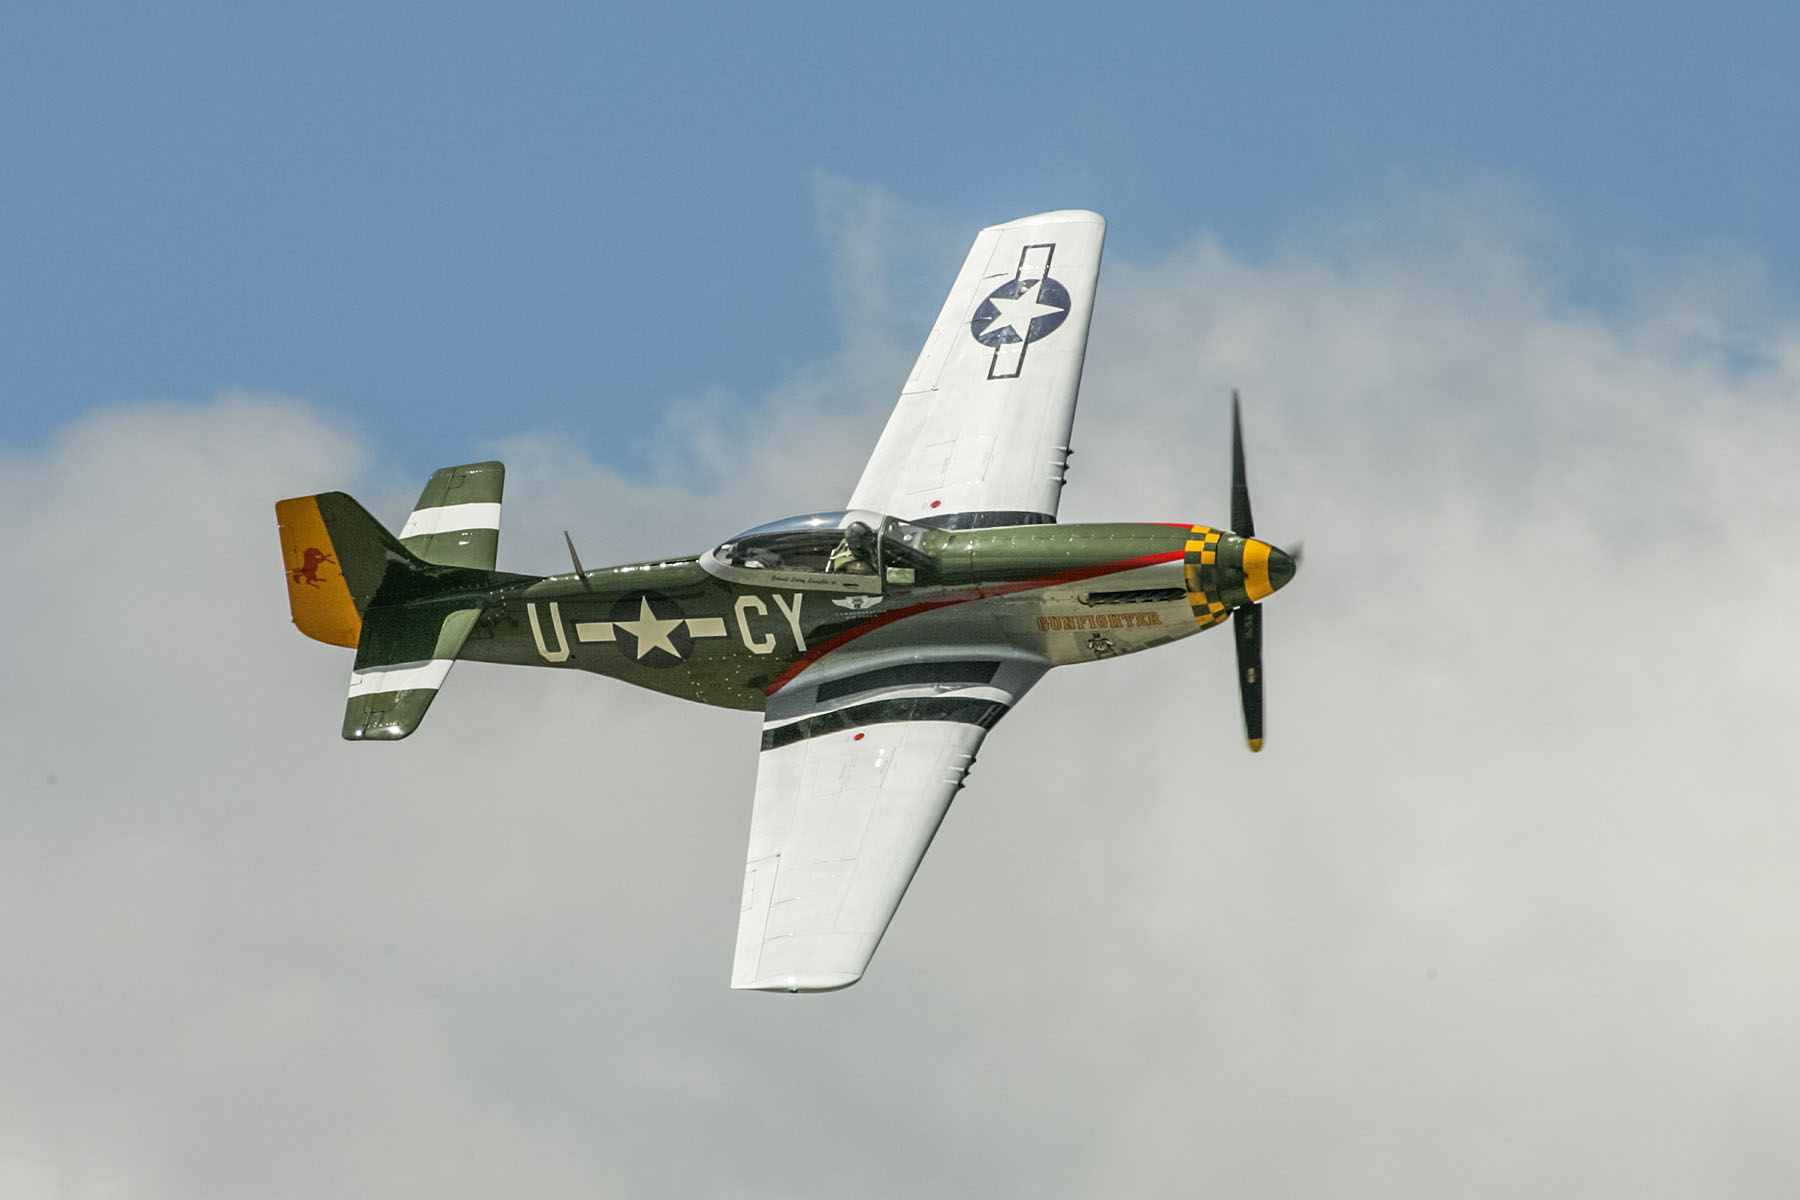 P-51 Mustang "Gunfighter", Sioux Falls Air Show.  Click for next photo.